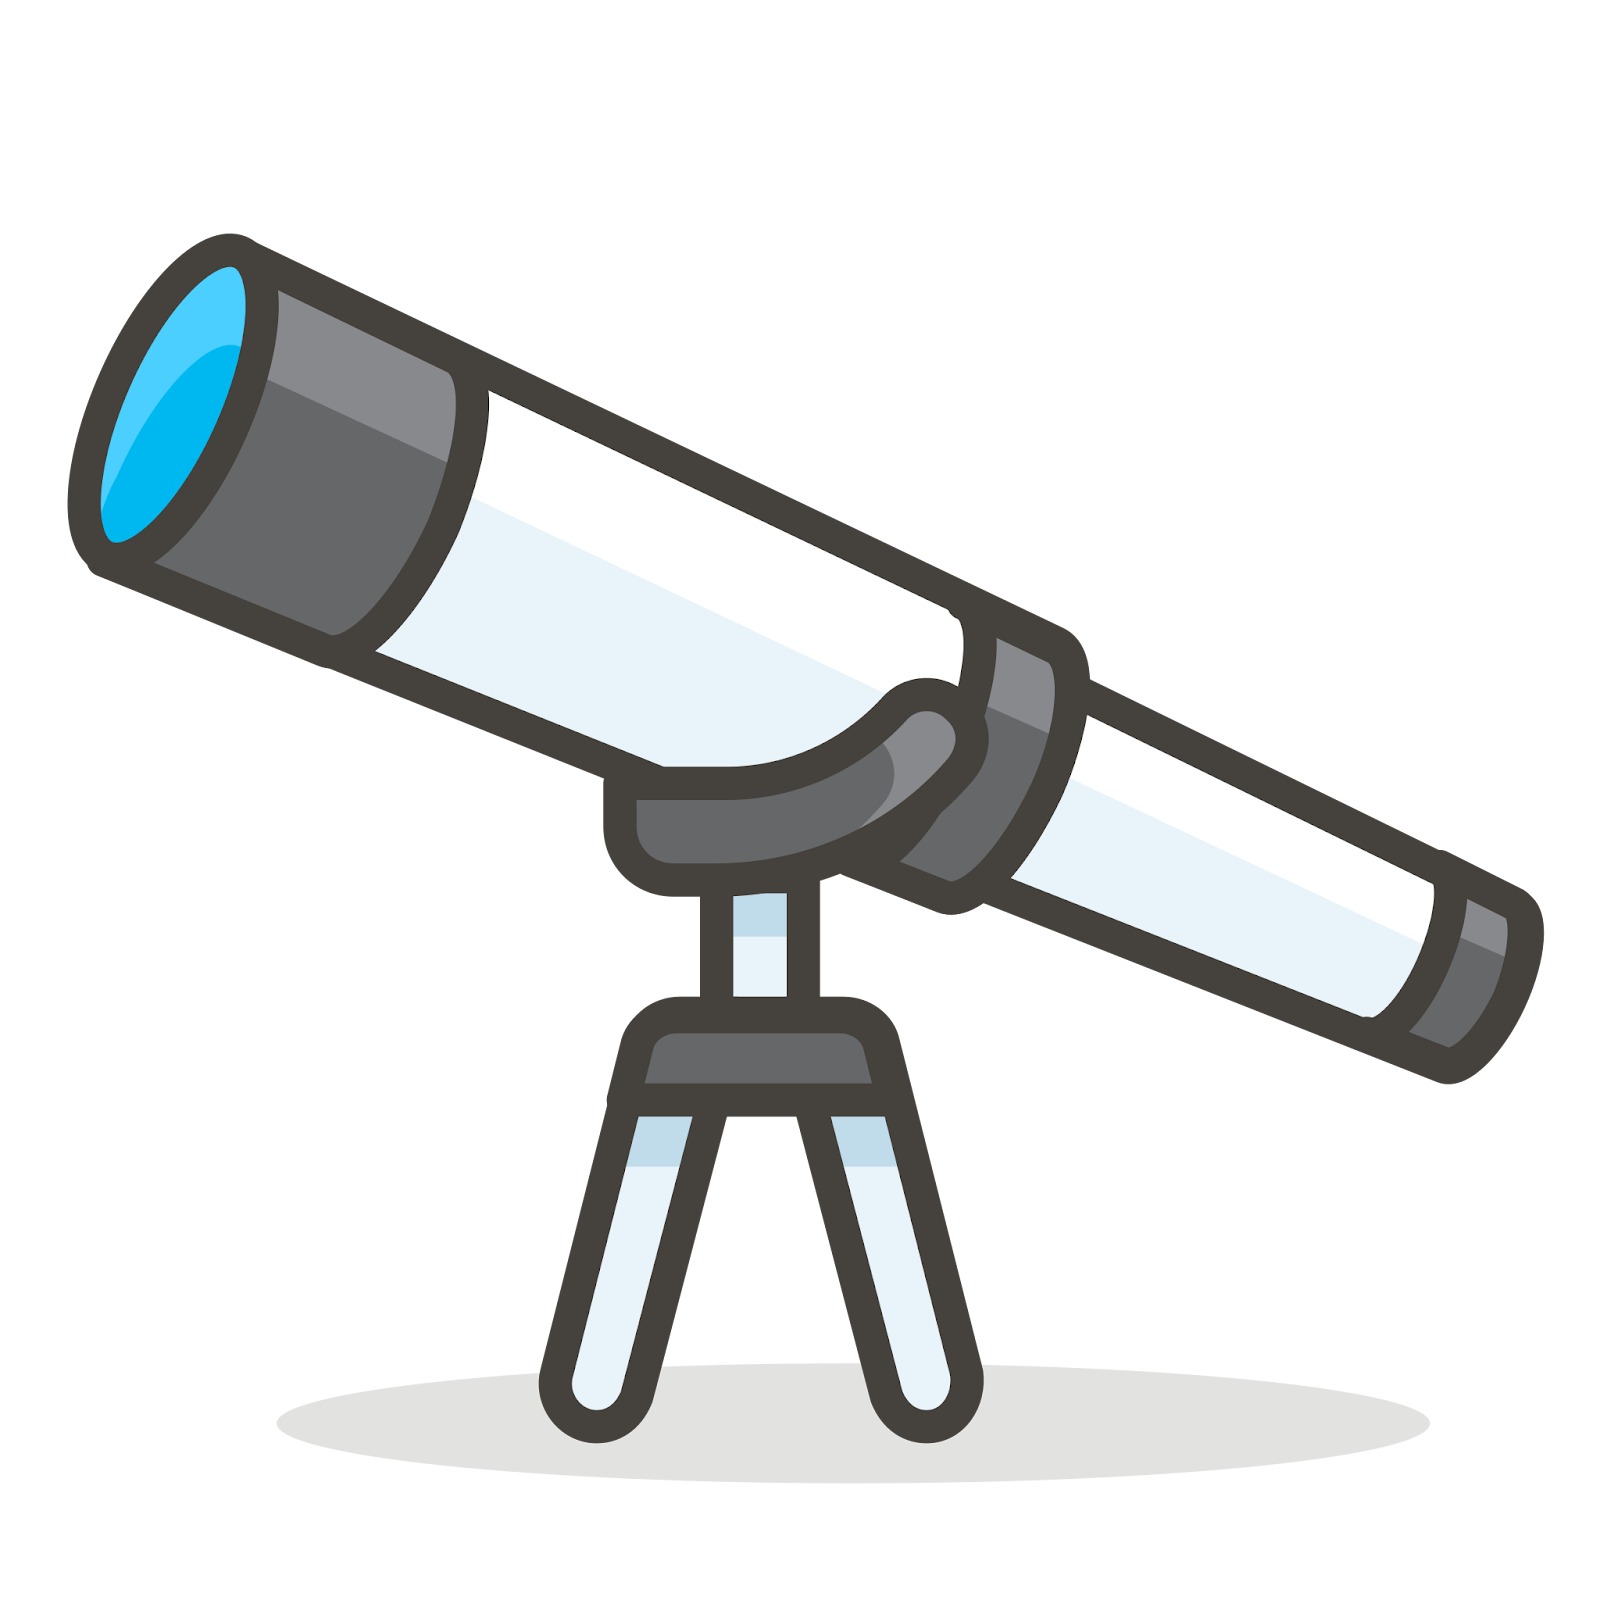 A clipart of a telescope. Readers may skip words, but they will not skip images. 